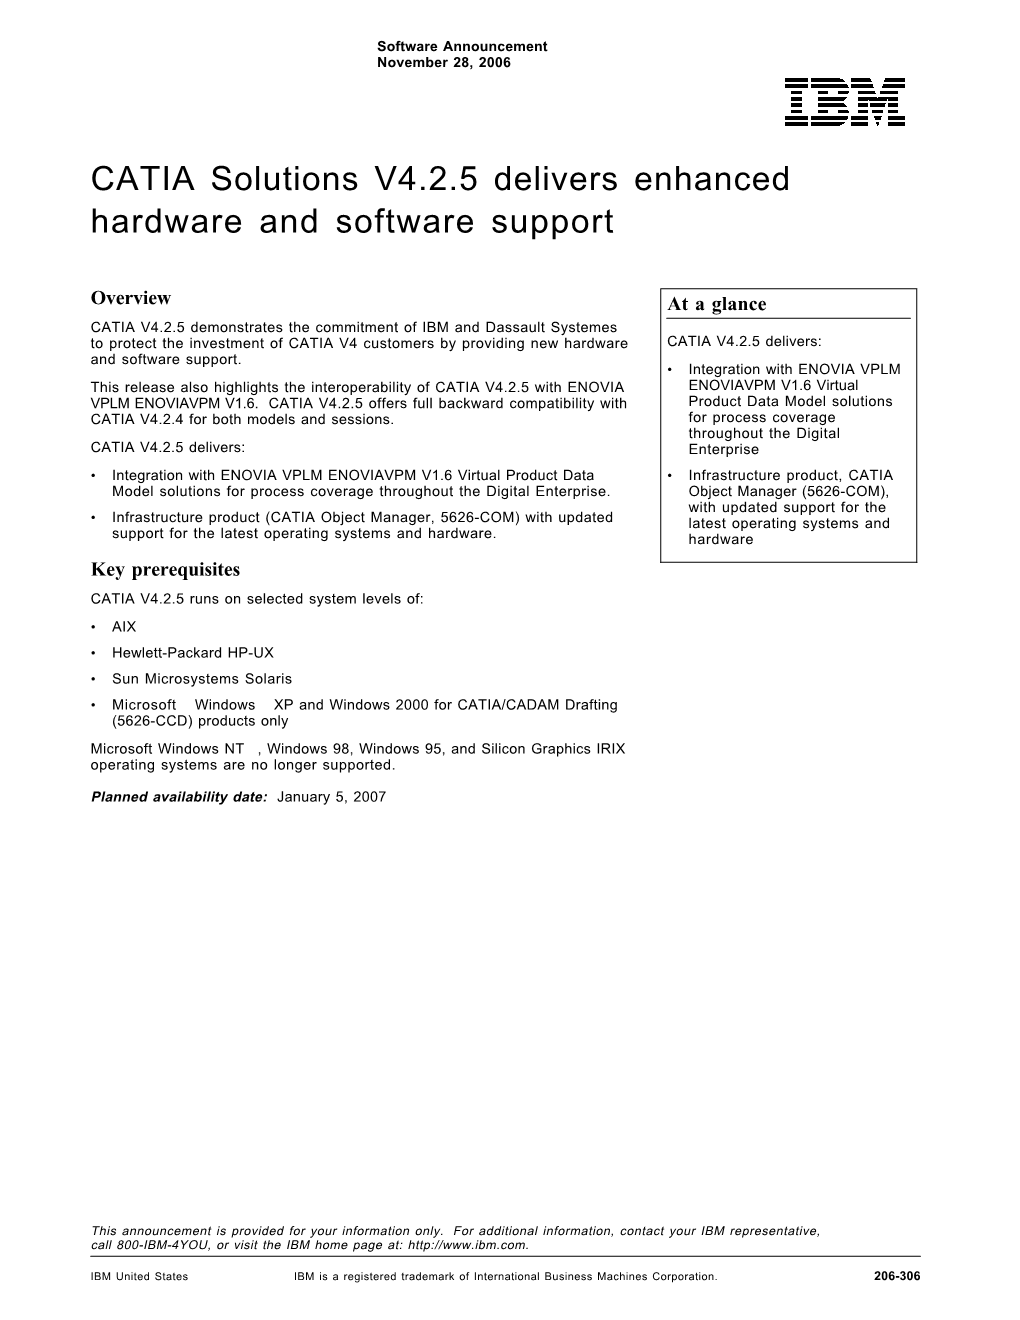 CATIA Solutions V4.2.5 Delivers Enhanced Hardware and Software Support